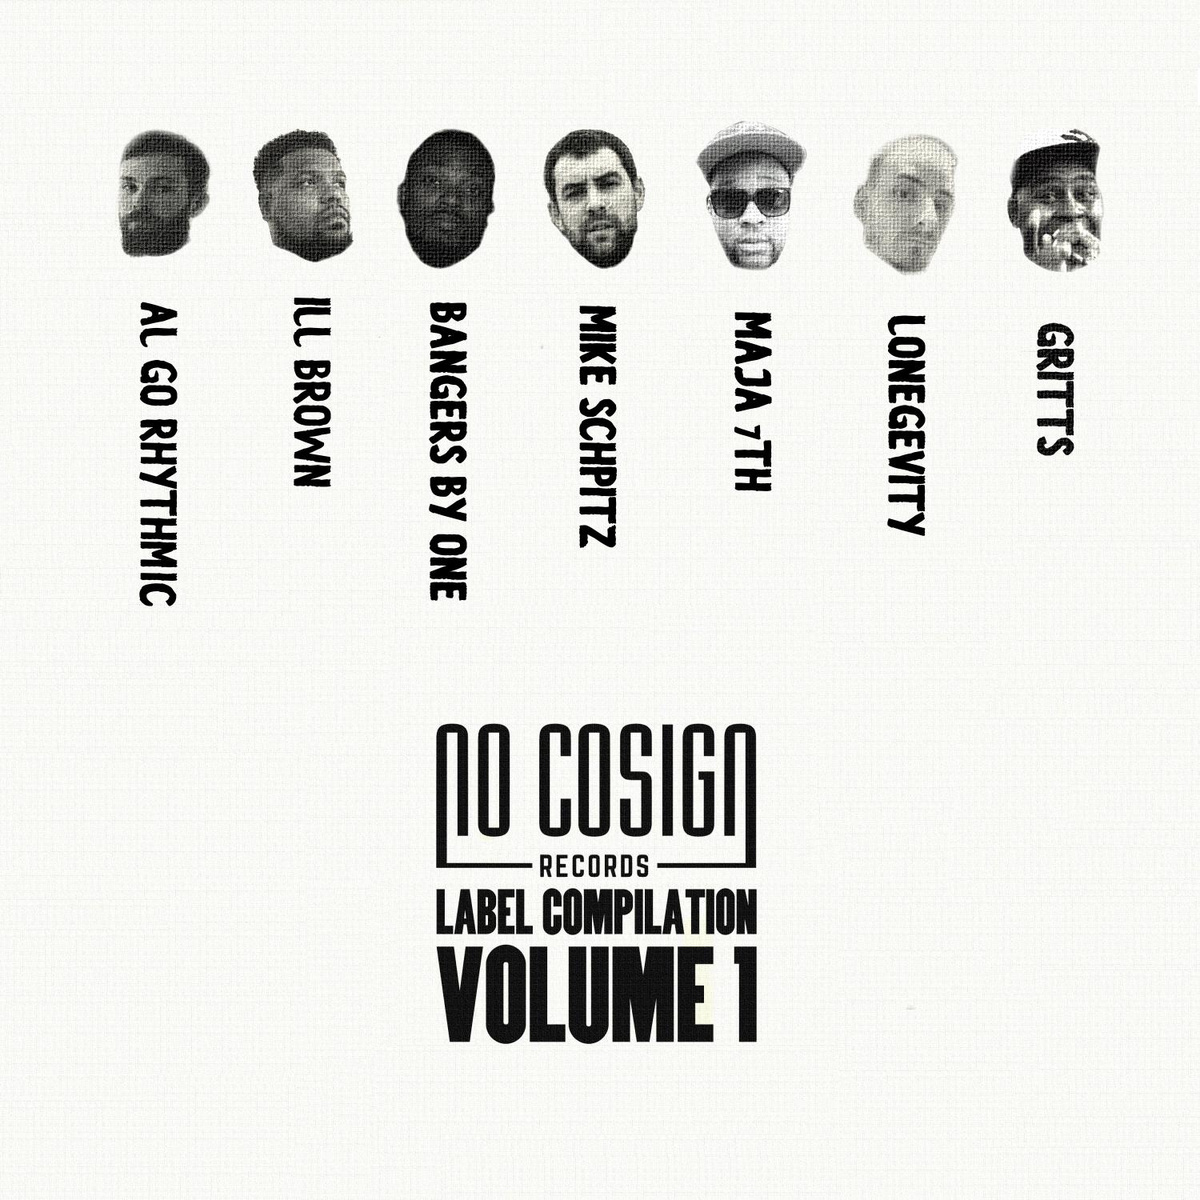 Lonegevity Launches NO COSIGN RECORDS